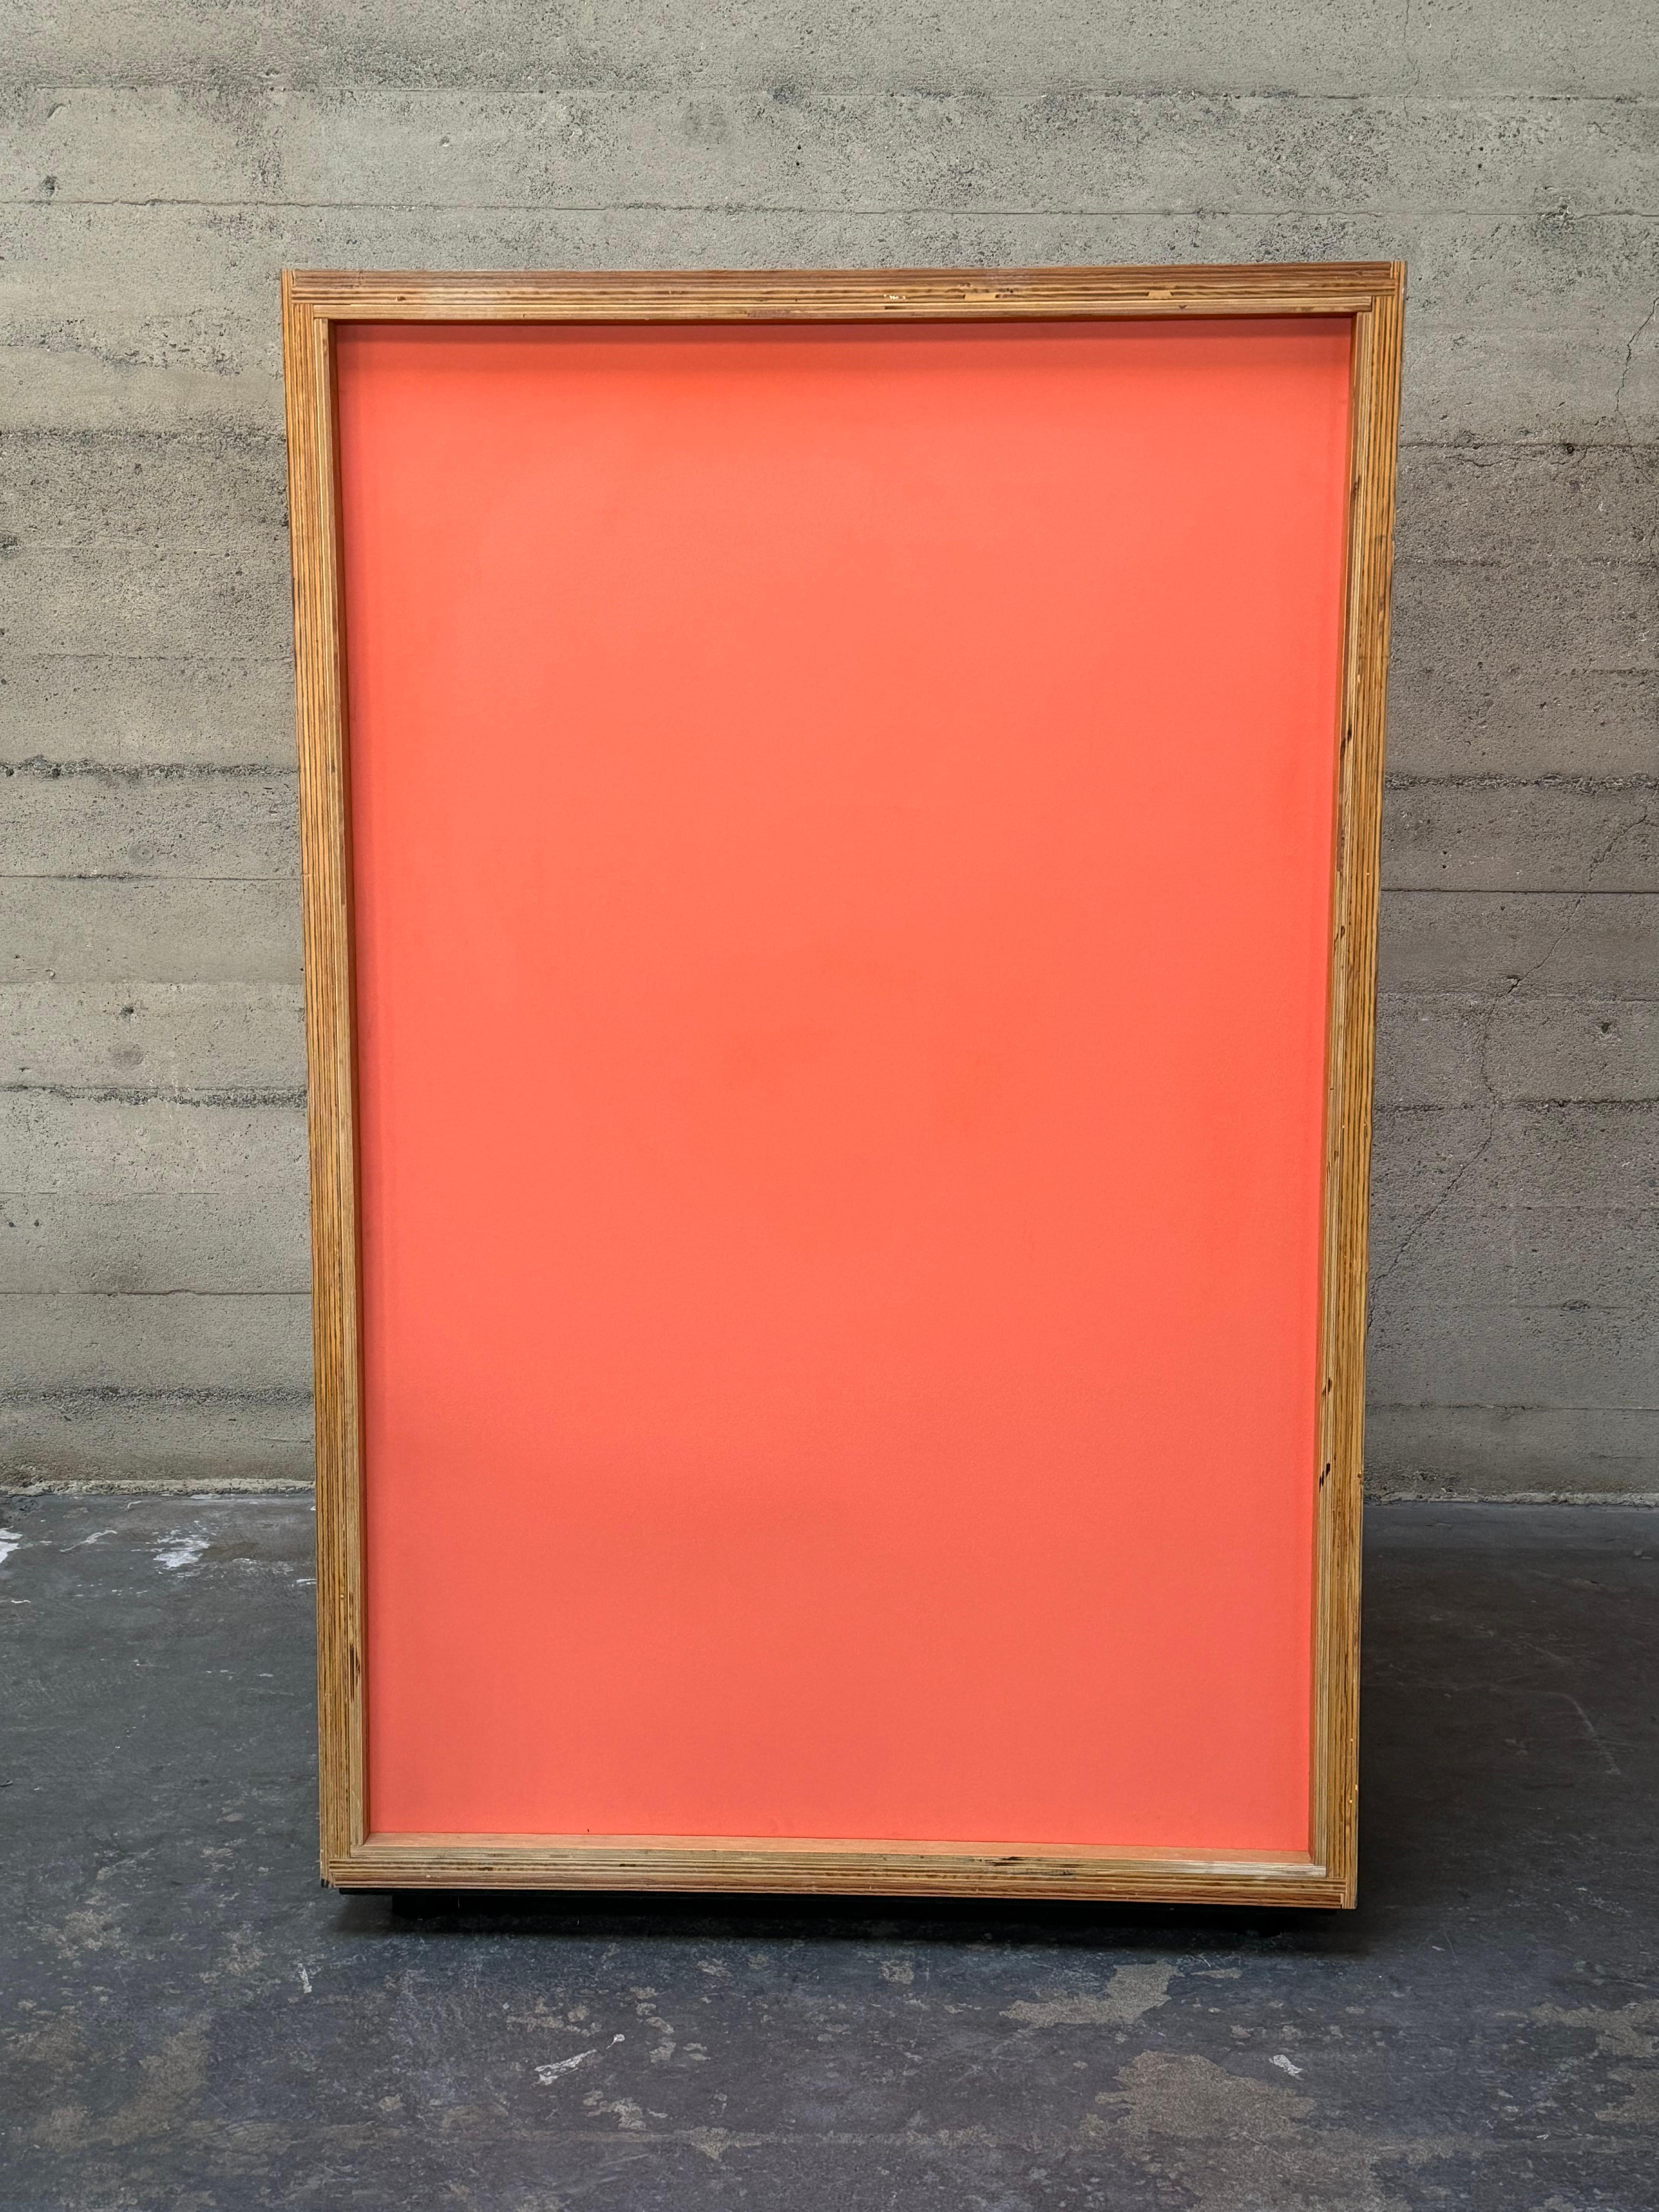 Jean Prouve Style Cabinet with Sliding Doors #2 In Good Condition For Sale In Oakland, CA